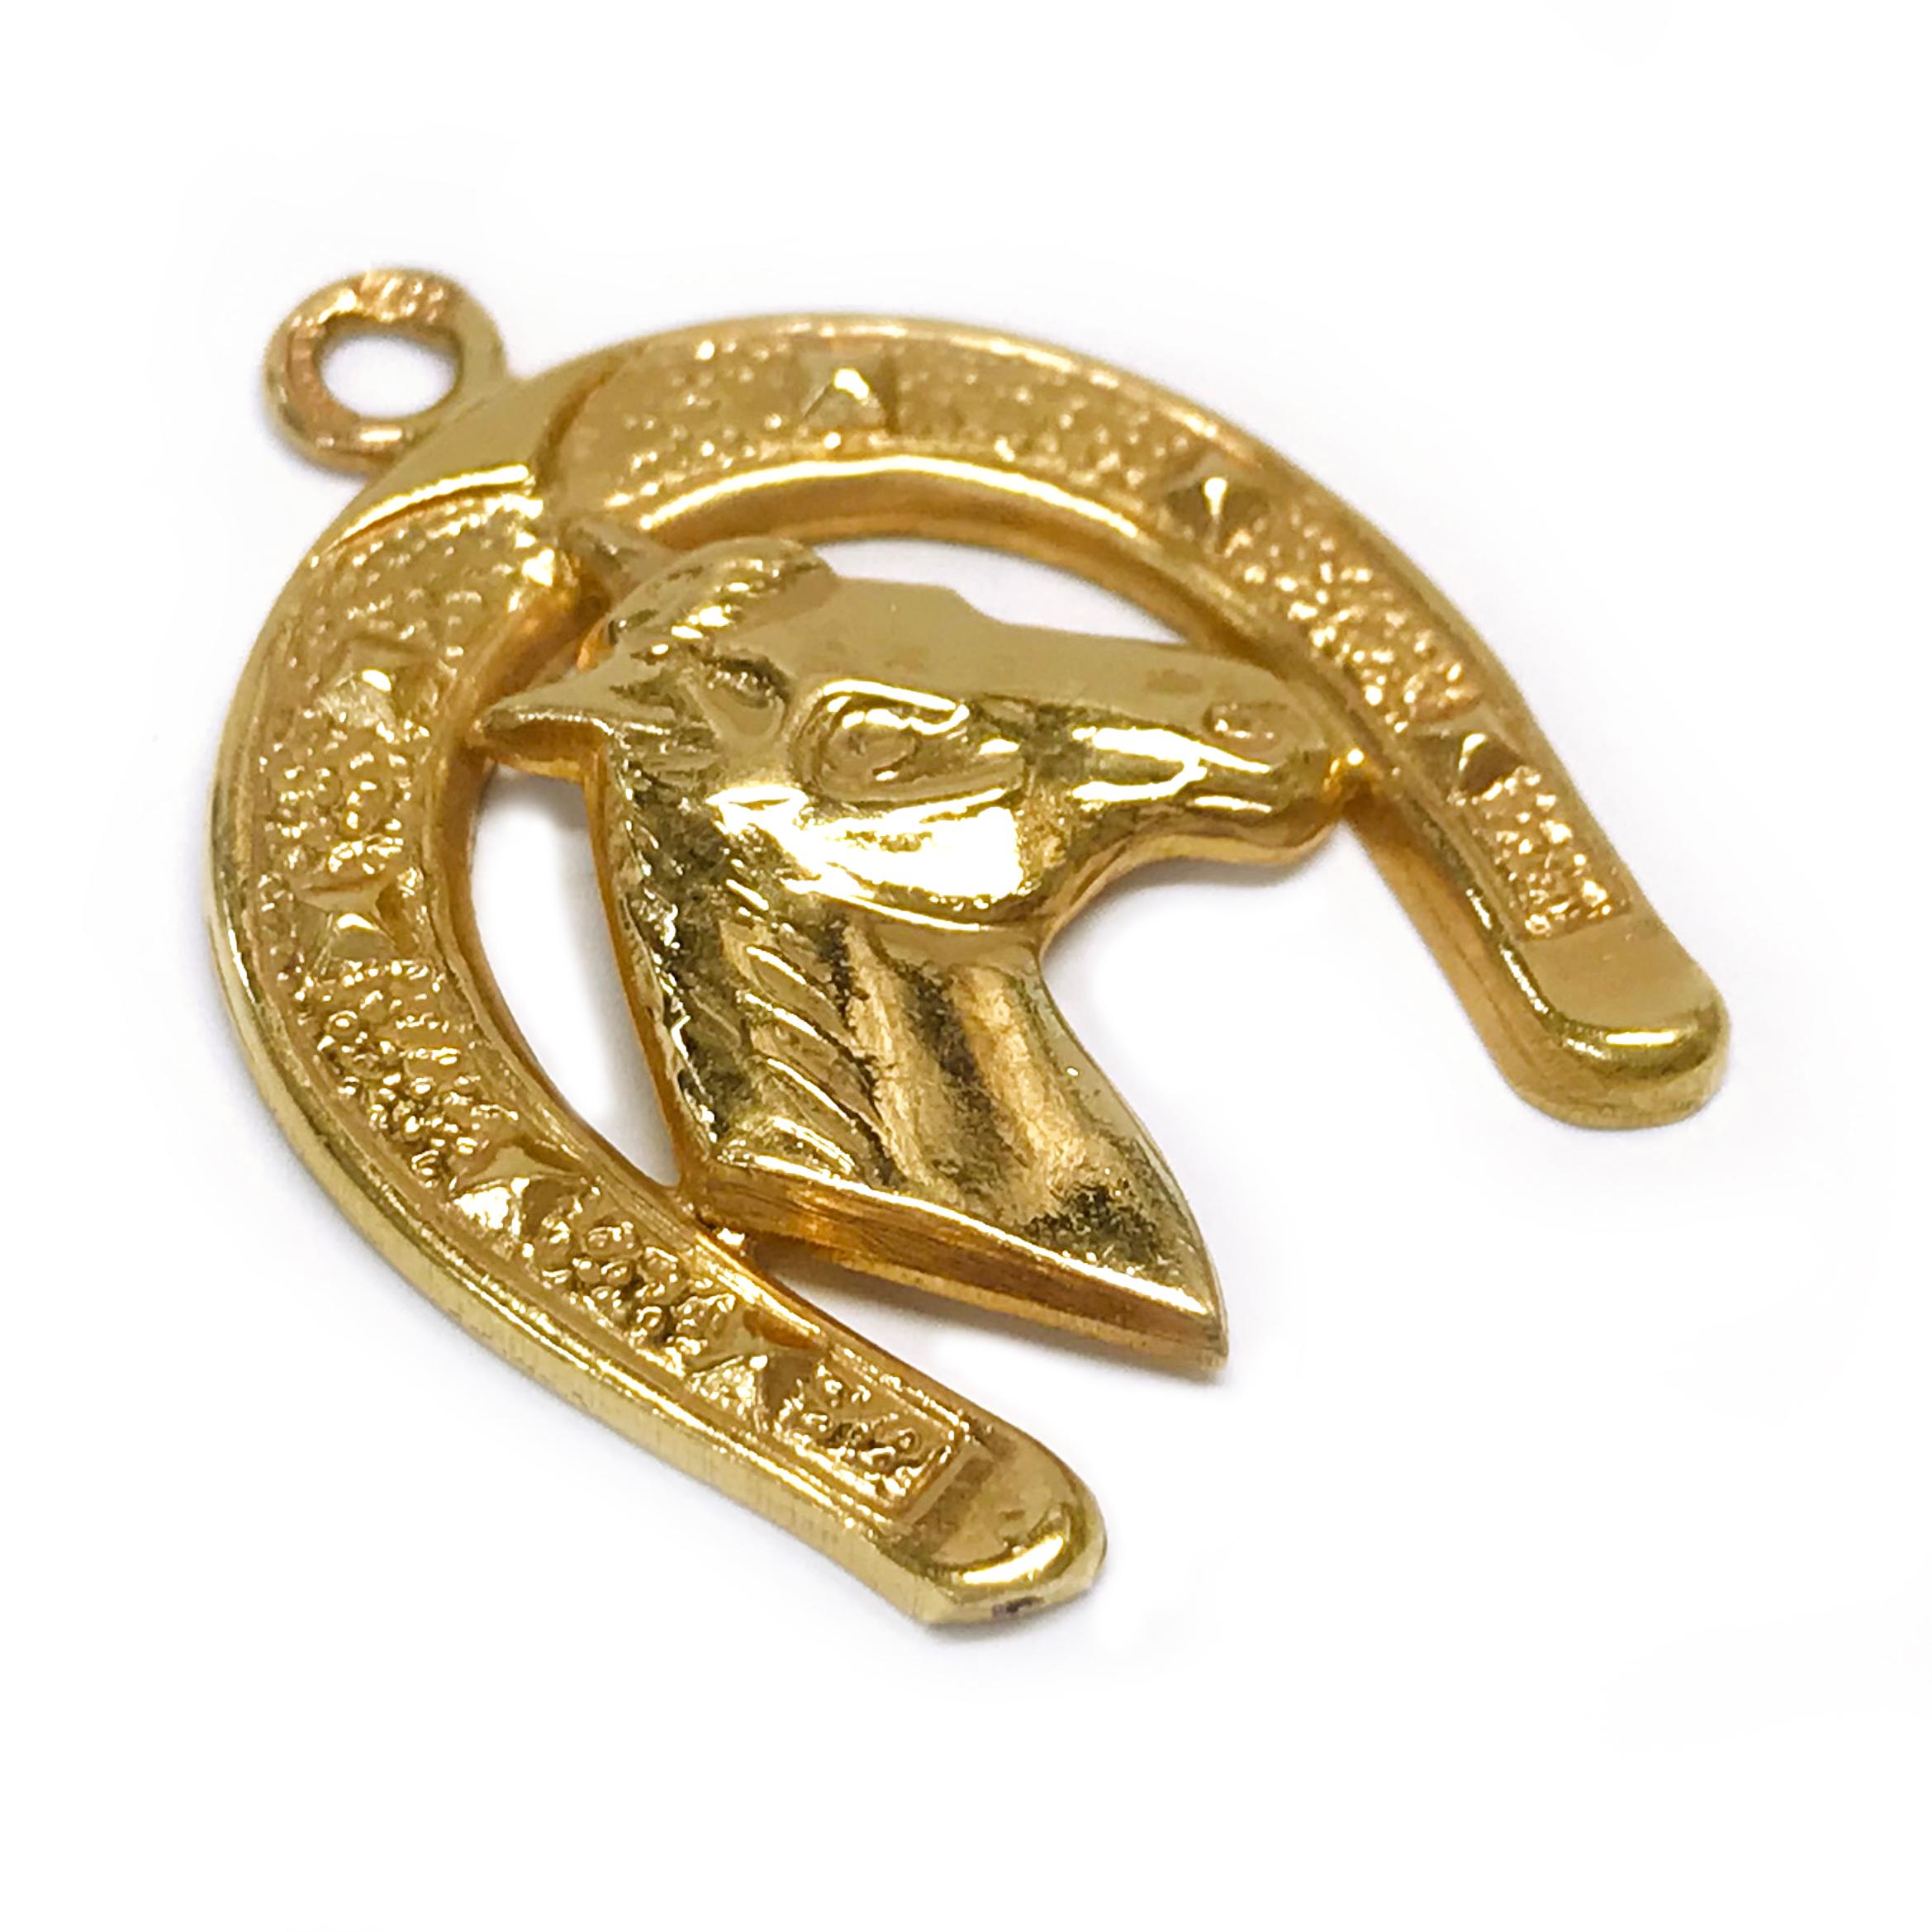 18 Karat Toliro Horse and Horse Shoe Pendant. The pendant features an image of a horse head from its side framed by a horseshoe. The majority of the pendant has a smooth shiny finish, with some detail in the horse mane, eye, and nostril and a